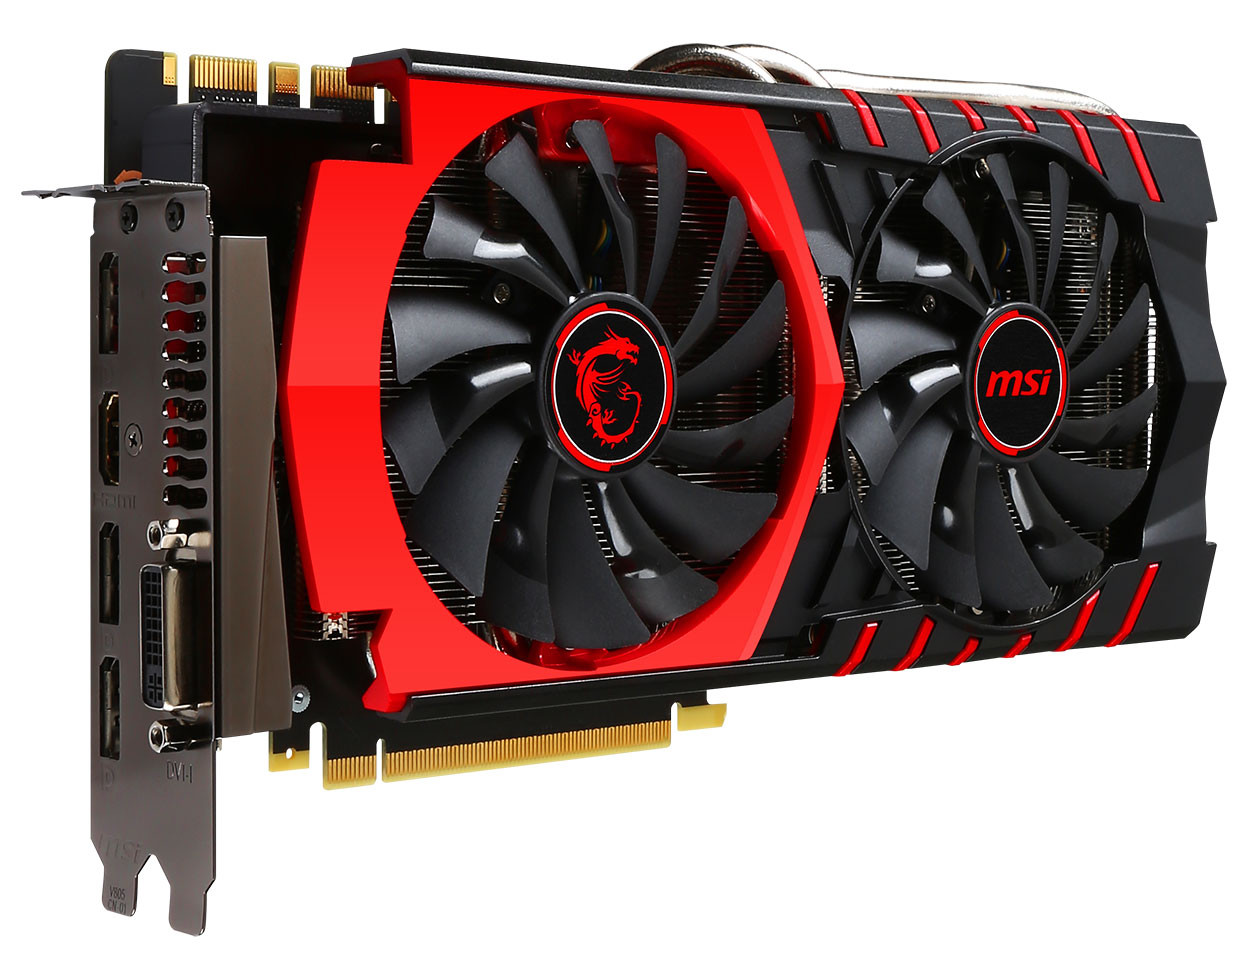 MSI Announces its GeForce GTX 980 Ti Gaming Graphics Cards techPowerUp